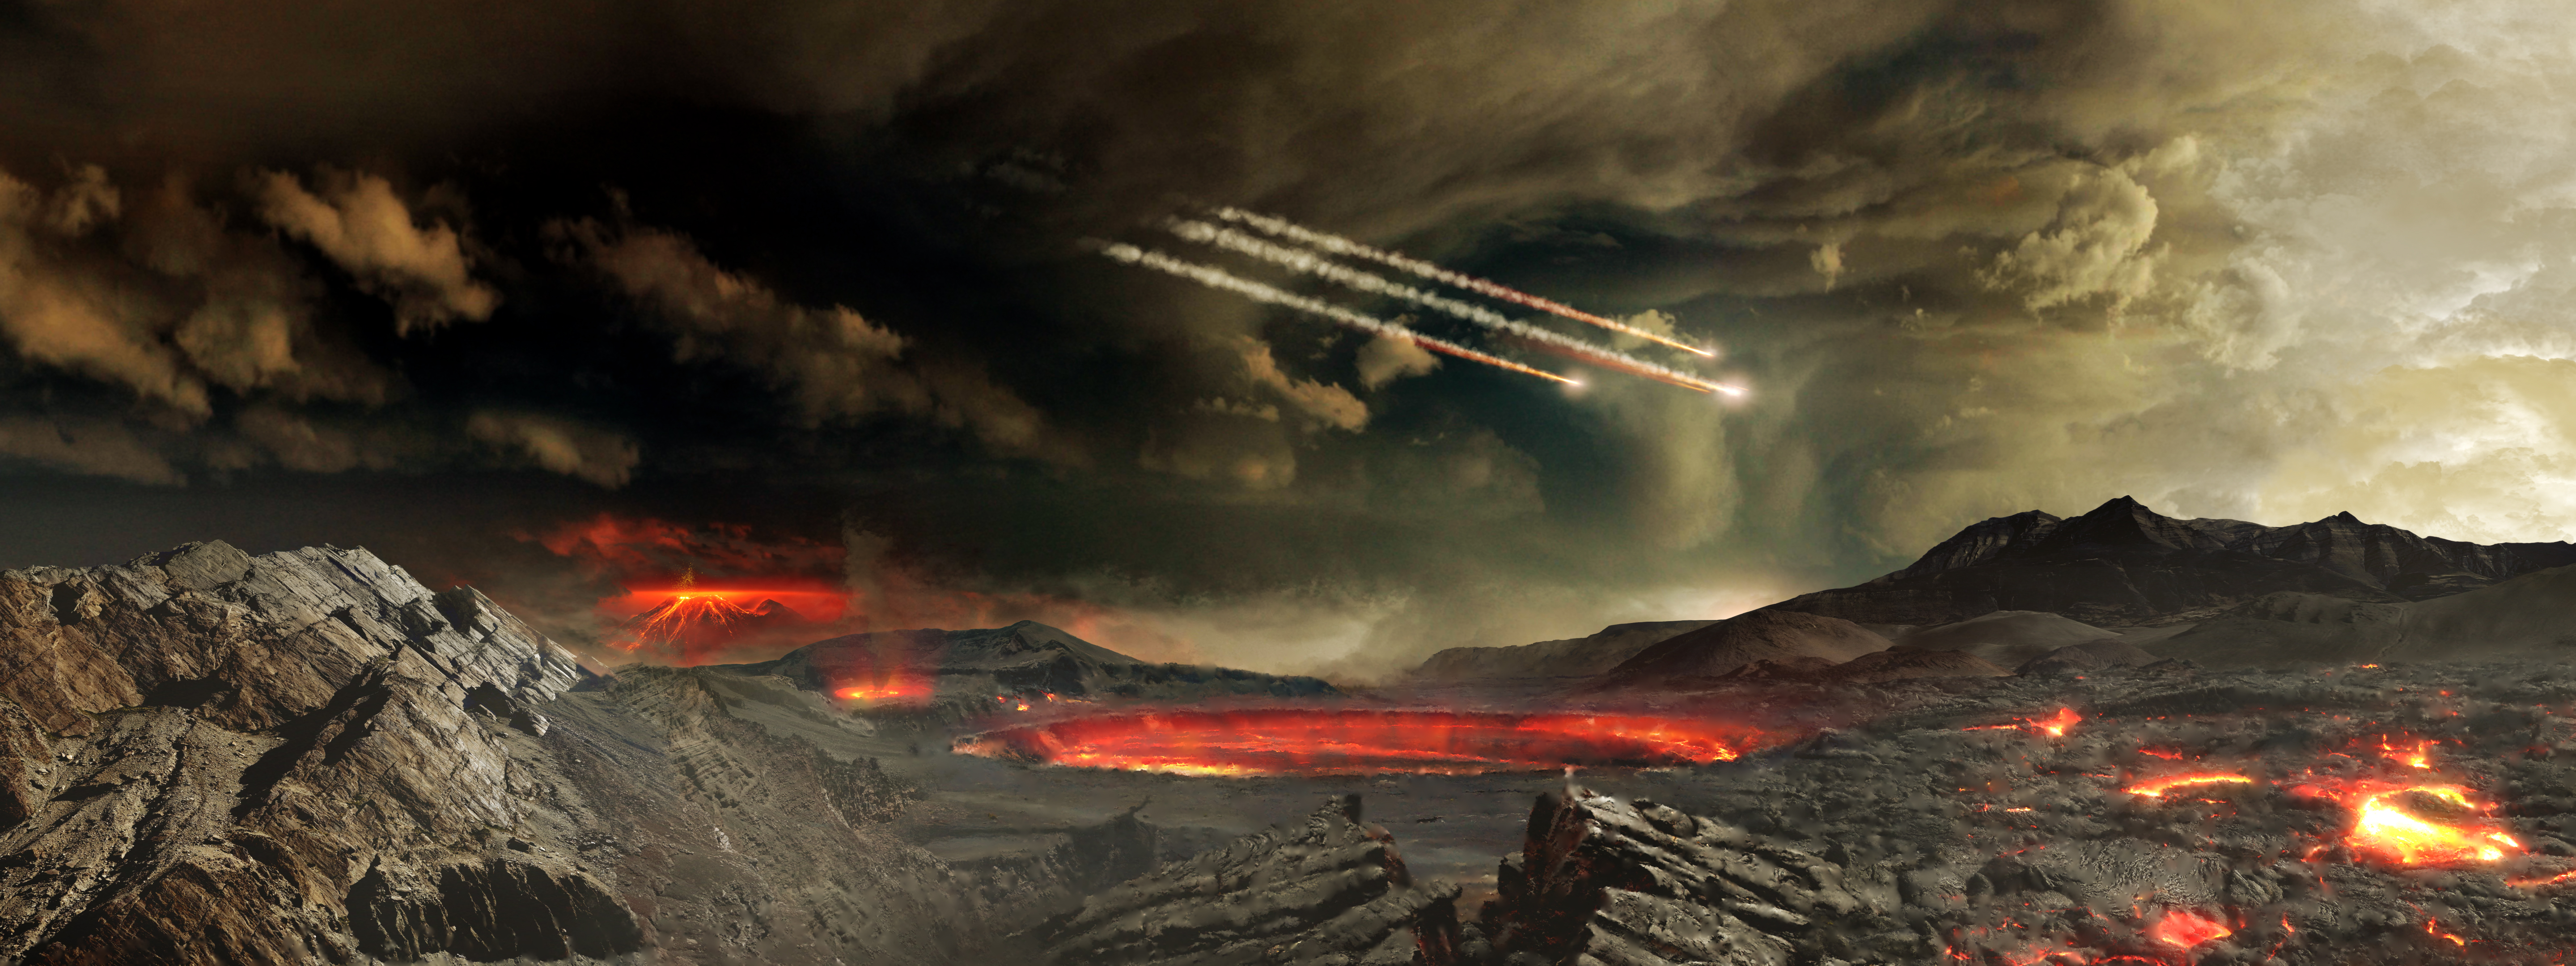 Wallpaper, geological phenomenon, sky, wildfire, volcanic landform, types of volcanic eruptions, fissure vent, lava, landscape, computer wallpaper, visual effects, explosive material 5760x2160